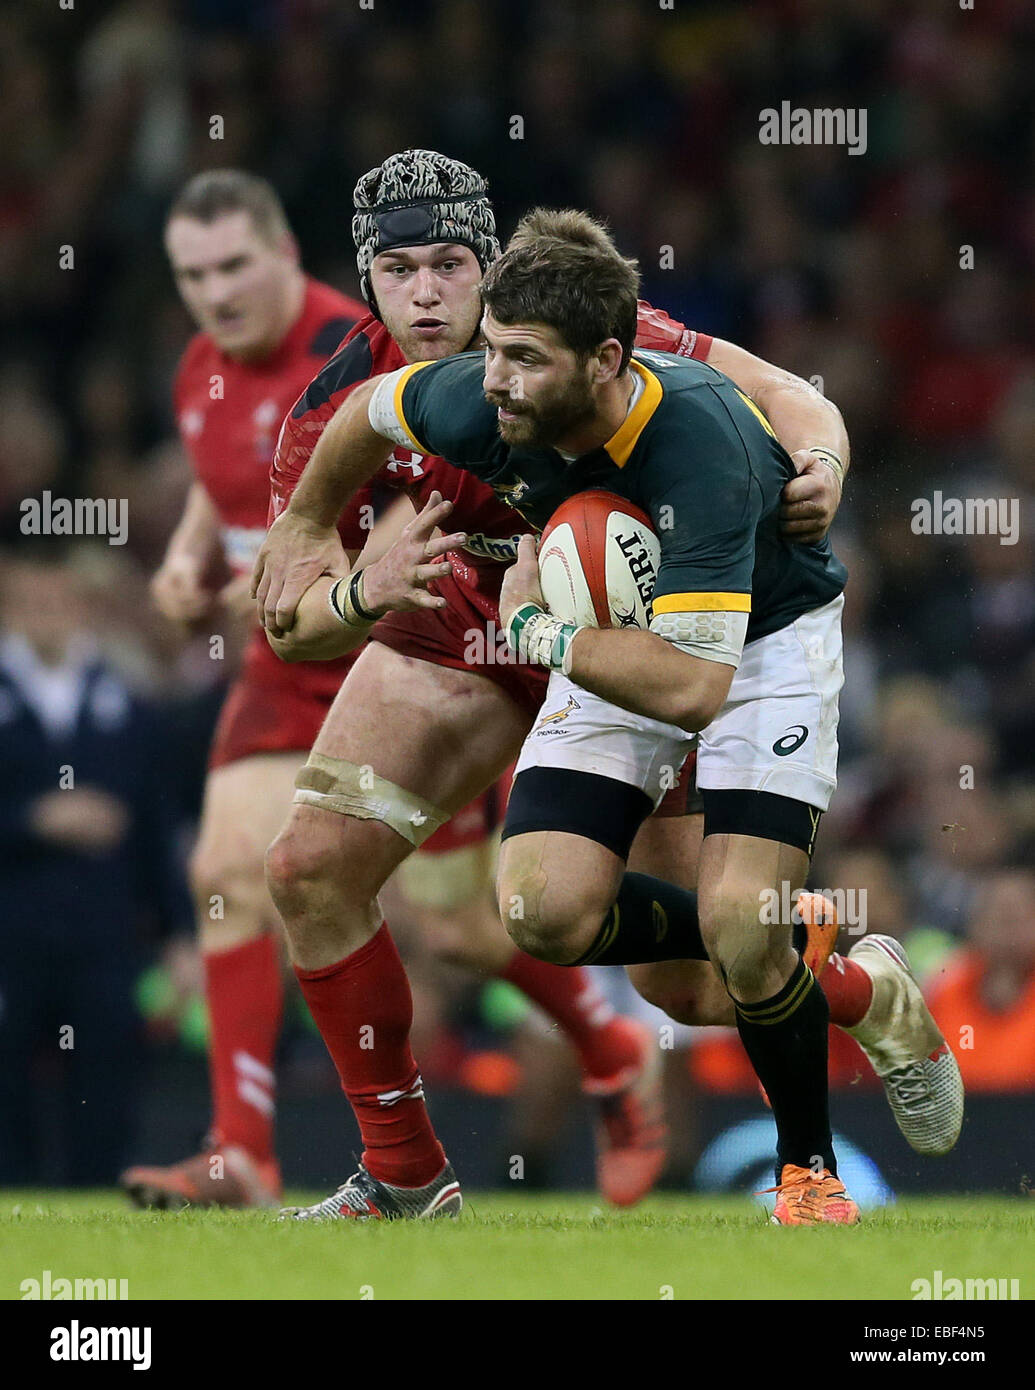 Cardiff, UK. 29th Nov, 2014. Dan Lydiate of Wales captures Willie le Roux of South Africa - Autumn Internationals - Wales vs South Africa - Millennium Stadium - Cardiff - Wales - 29th November 2014 - Picture Simon Bellis/Sportimage. Credit:  csm/Alamy Live News Stock Photo